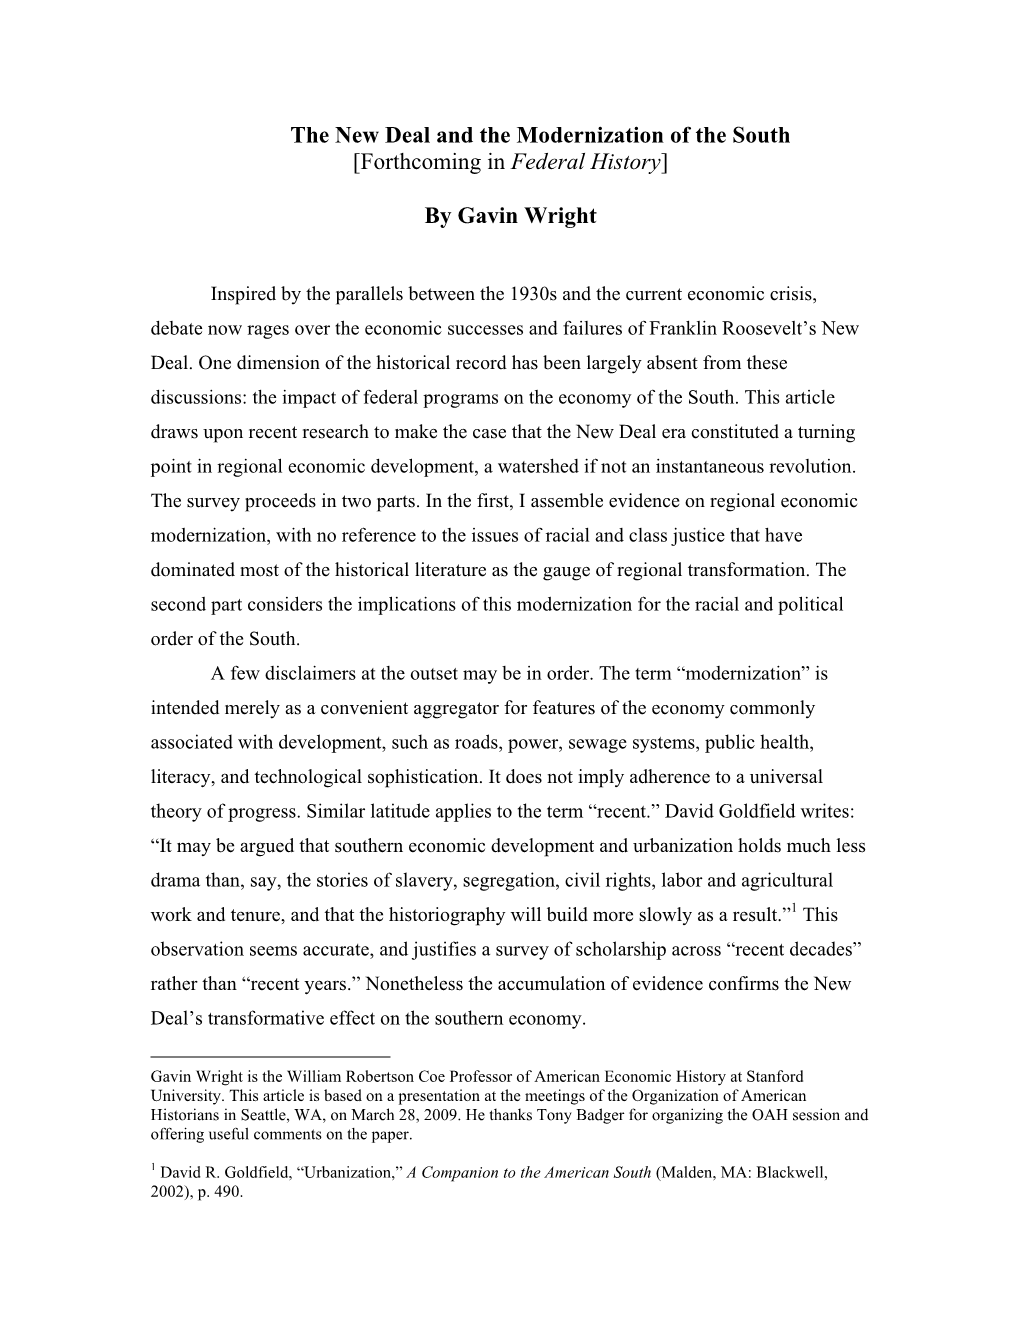 The New Deal and the Modernization of the South [Forthcoming in Federal History]